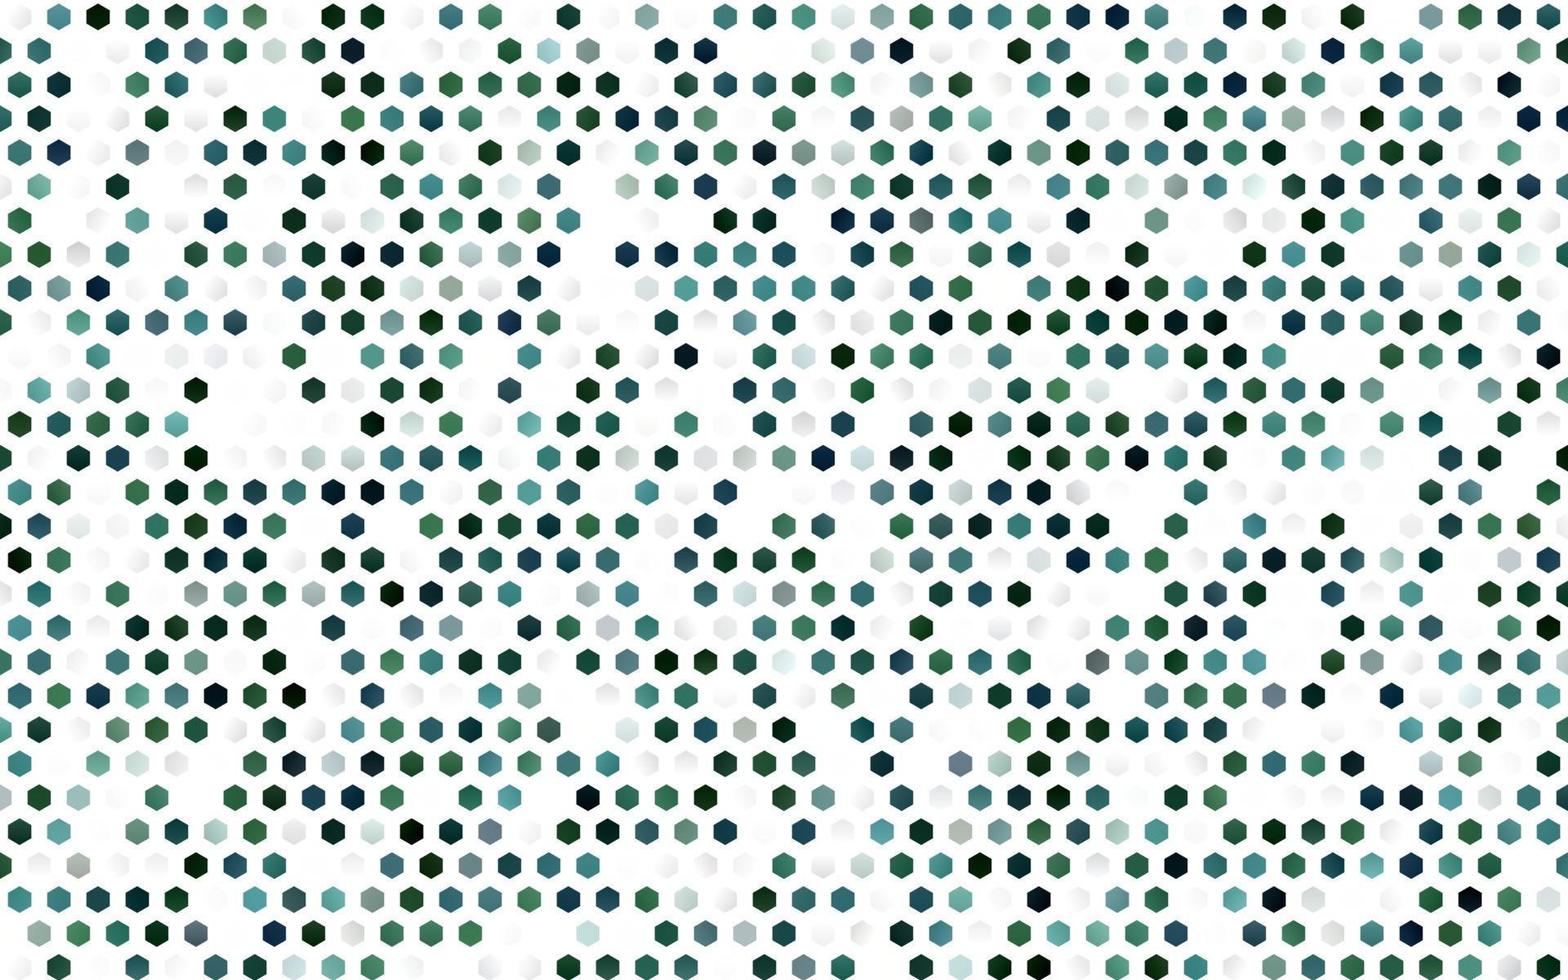 Dark Green vector texture with colorful hexagons.